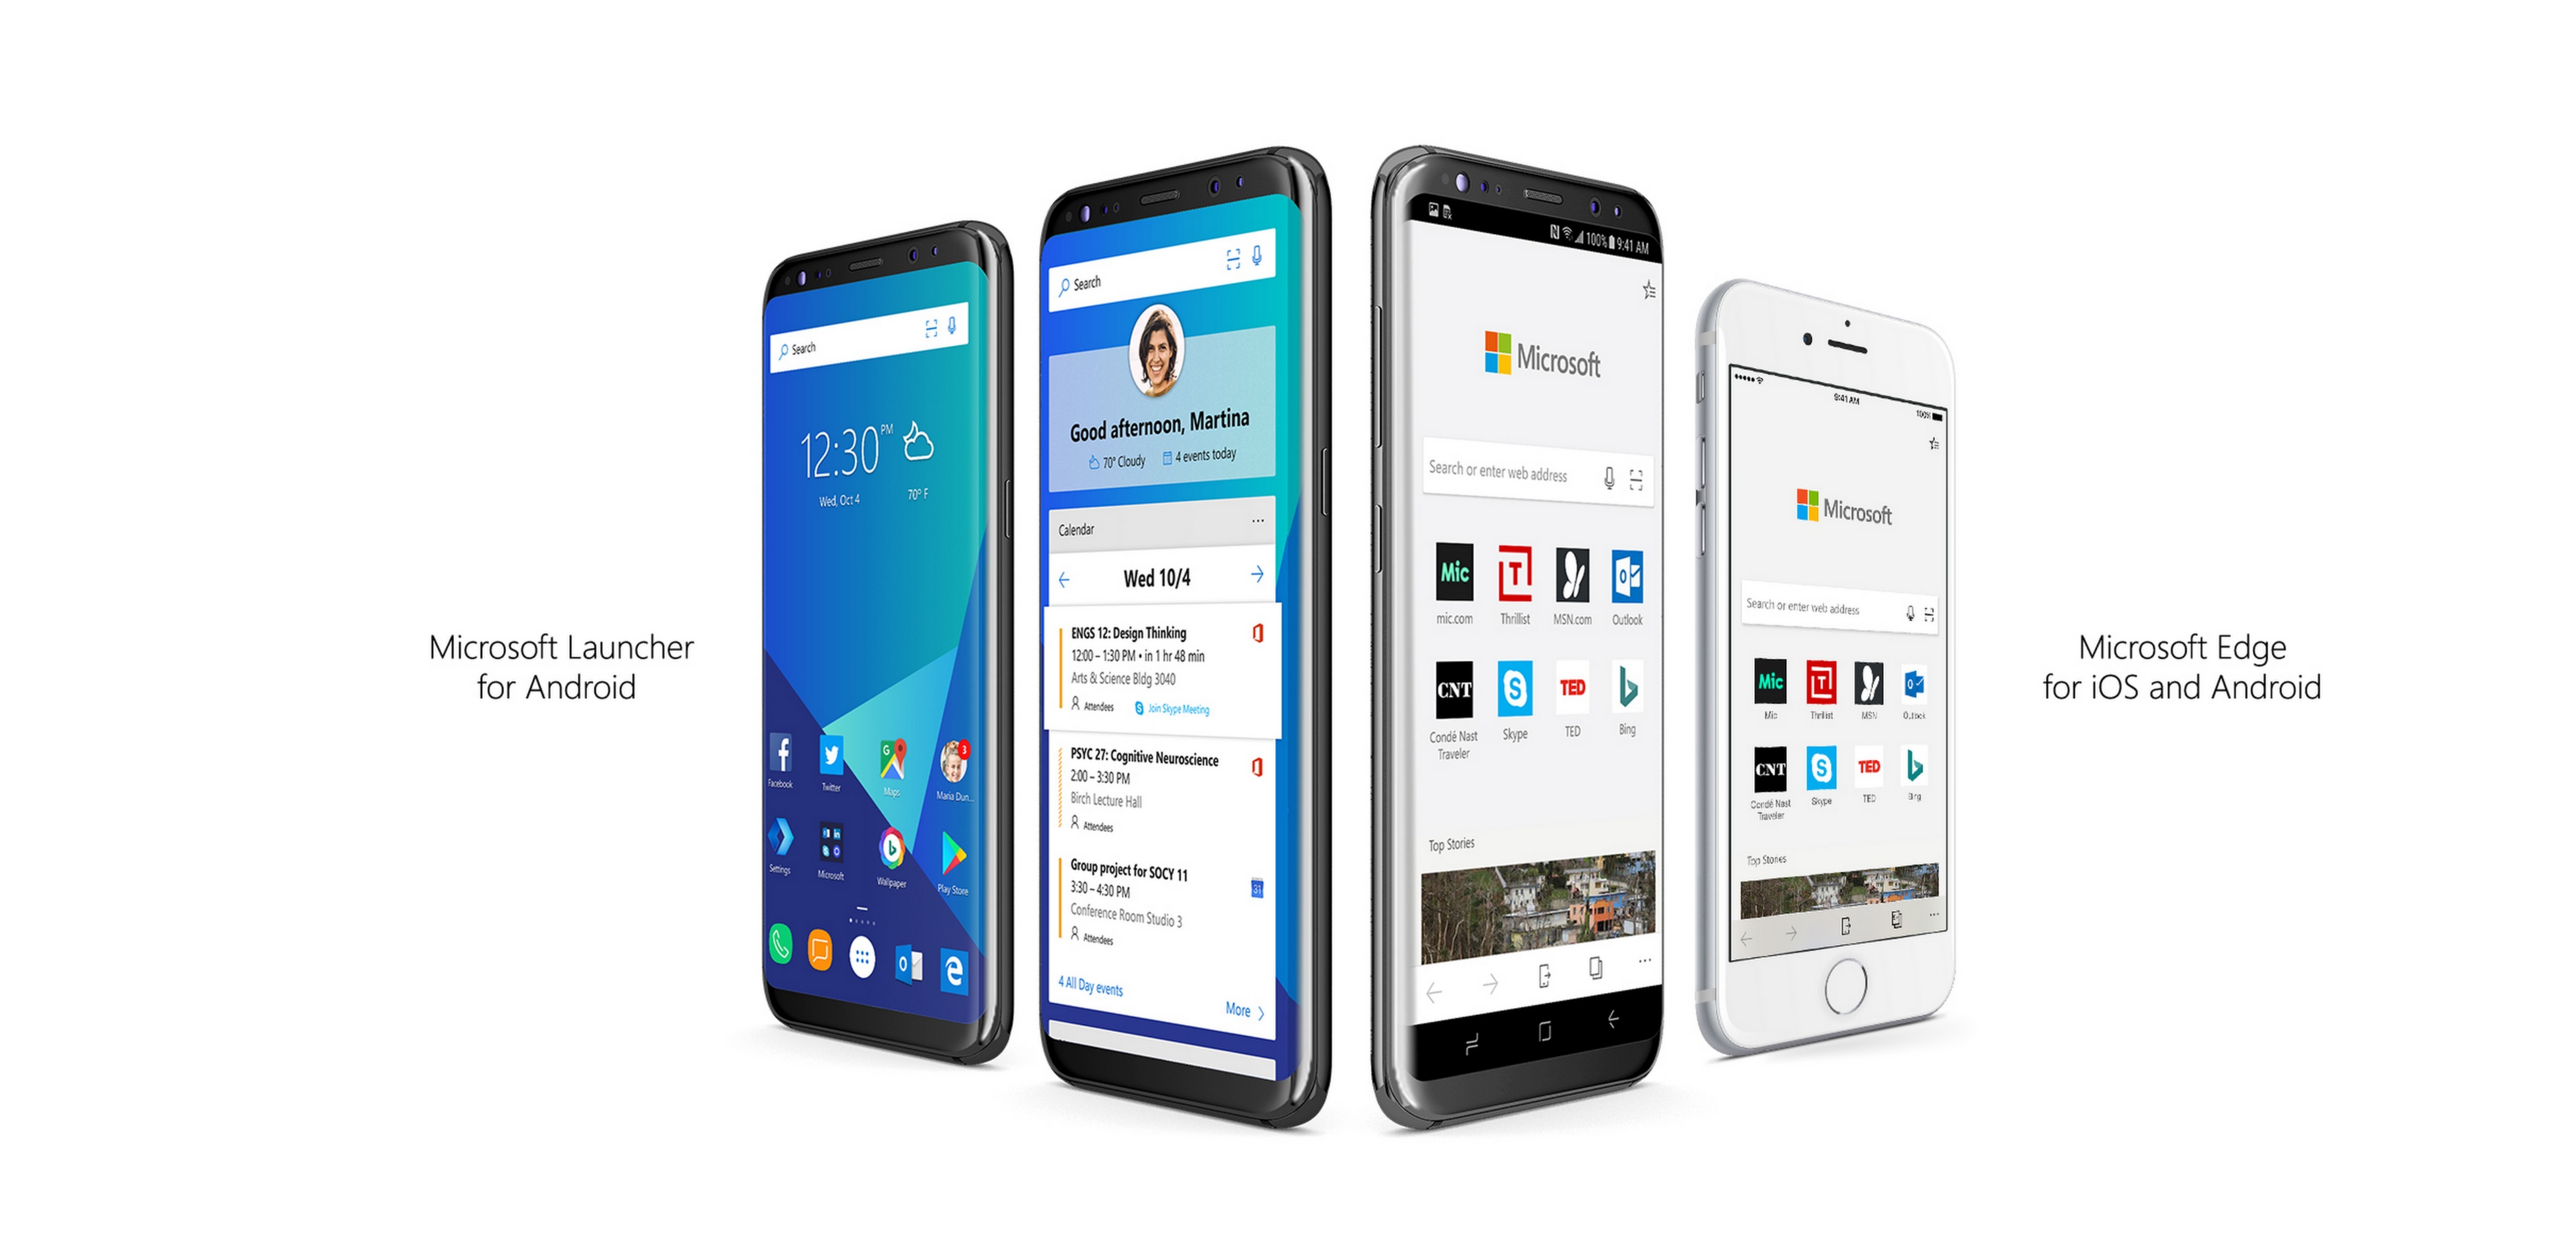 Introducing Microsoft Edge for iOS/Android and Microsoft Launcher for Android